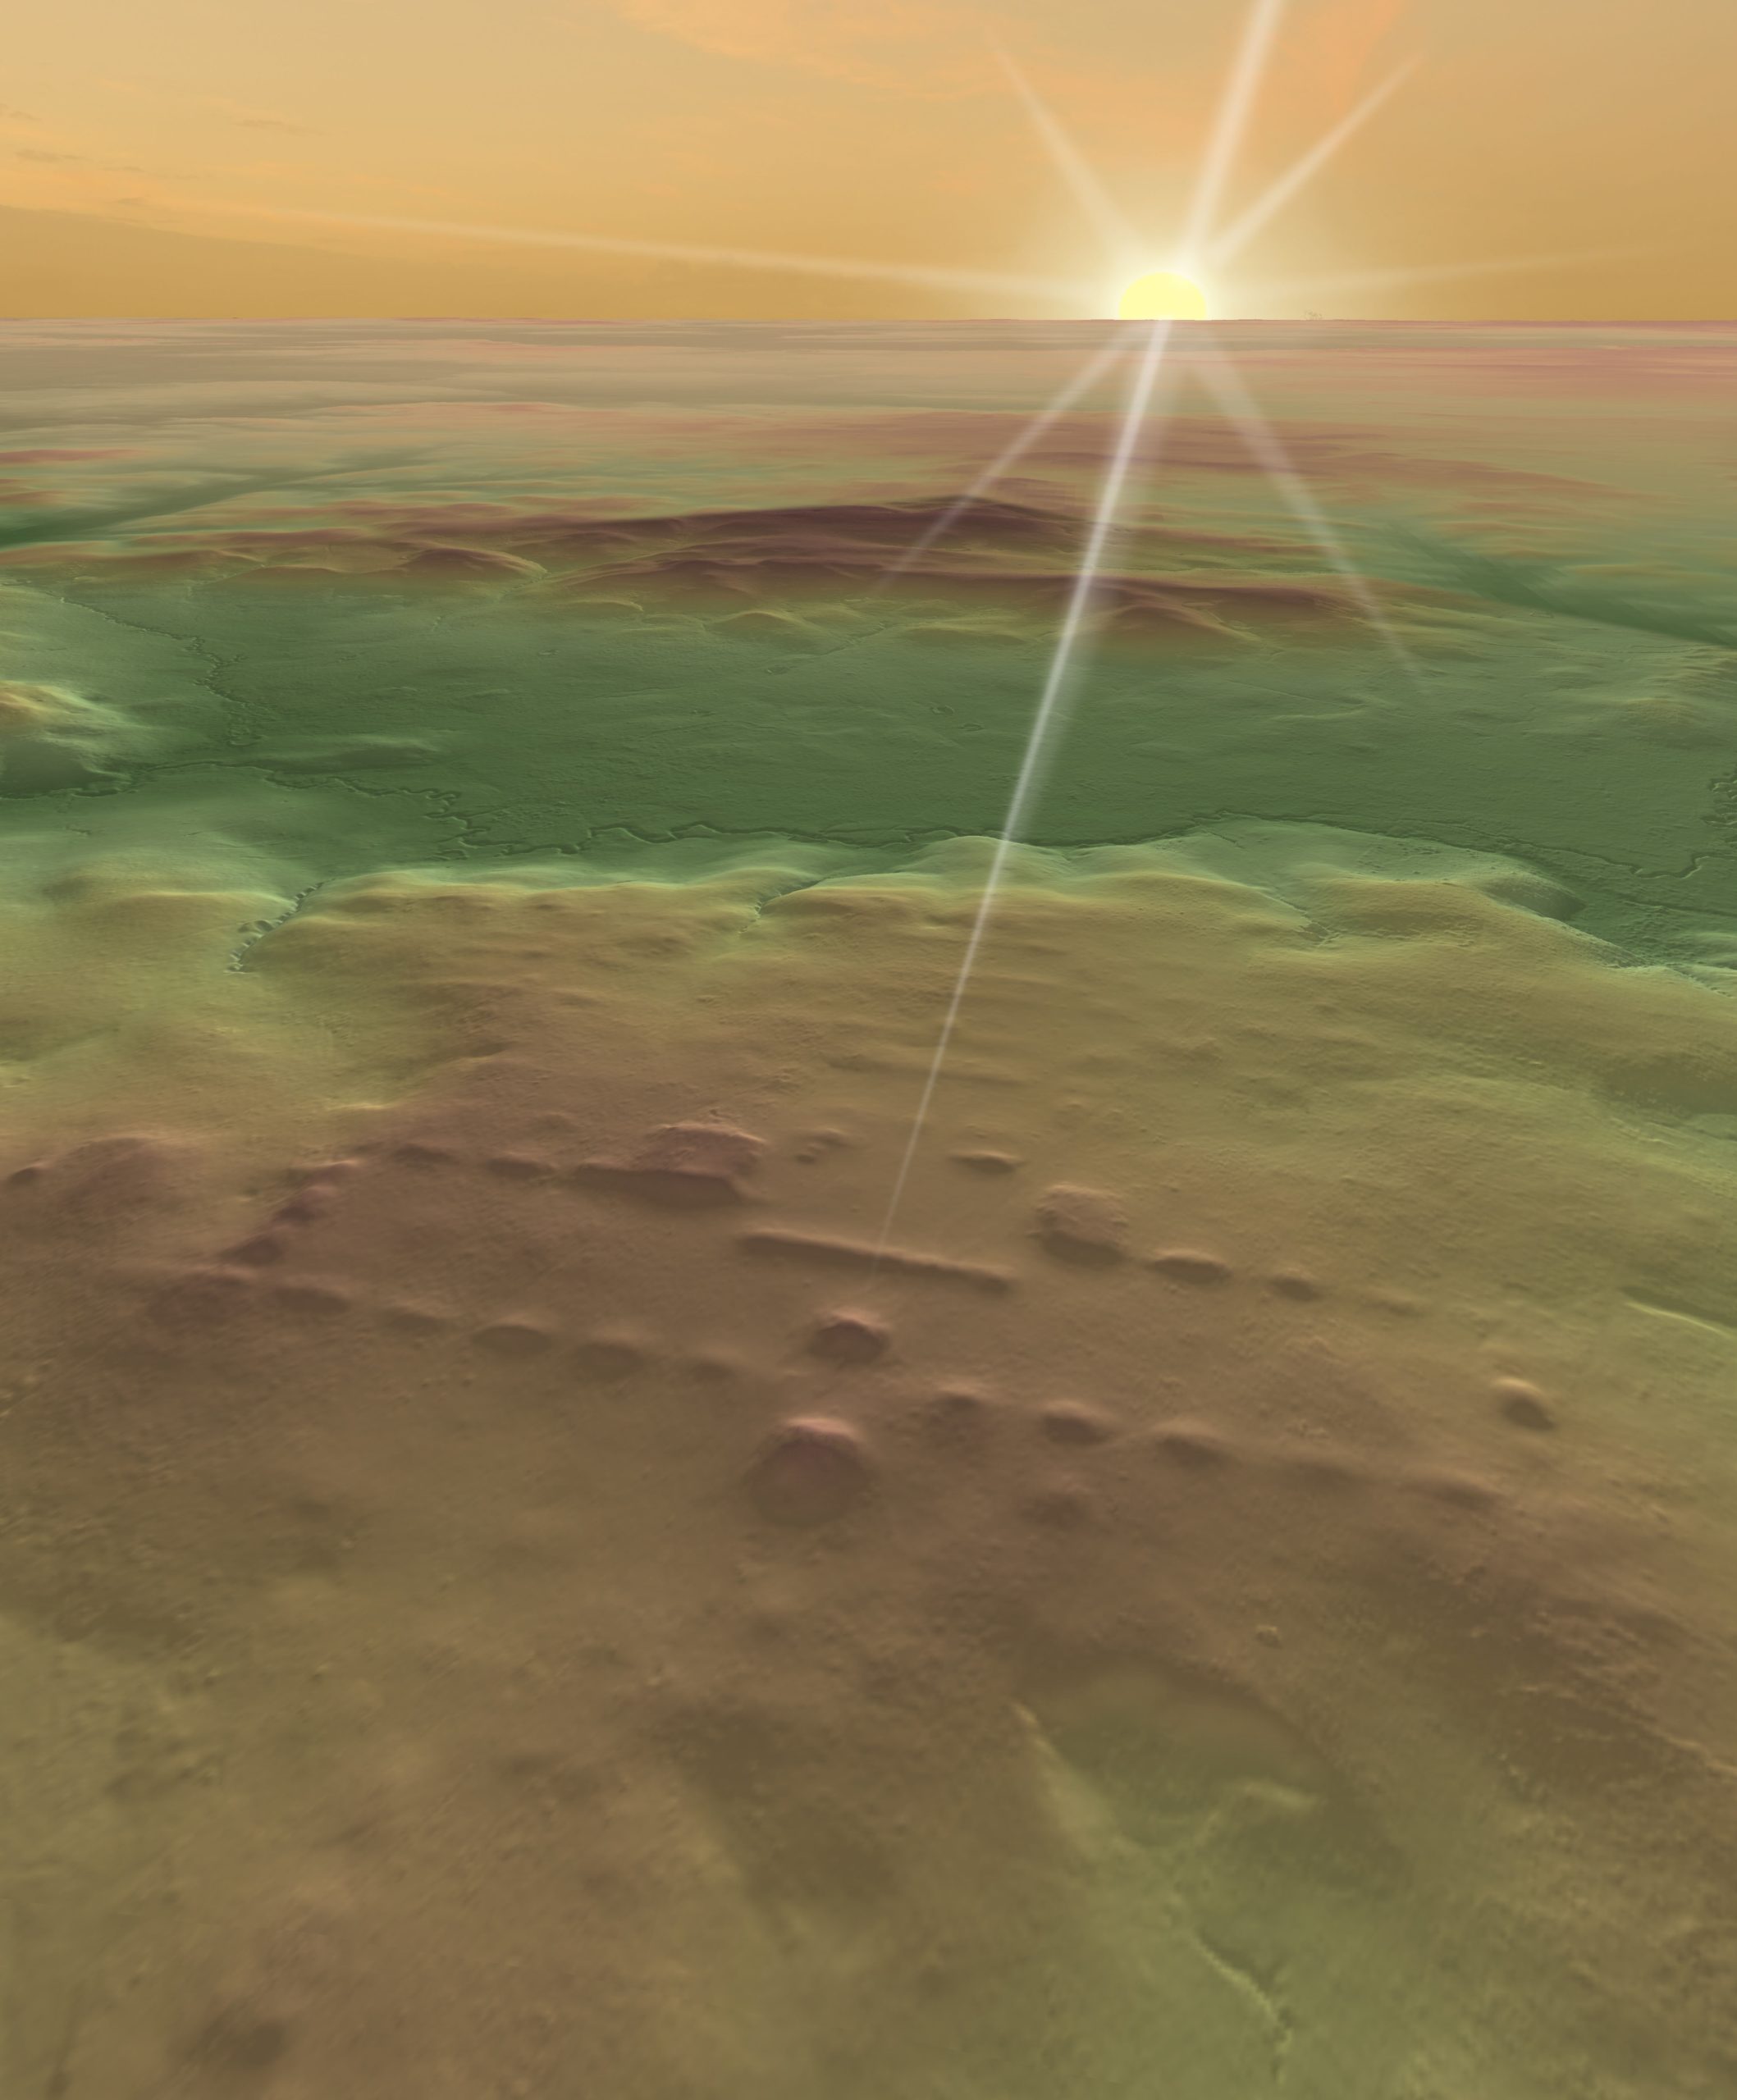 A lidar-based illustration of the site Buenavista, which appears to be aligned with the sunrise on certain days of the year. (Image: Inomata)